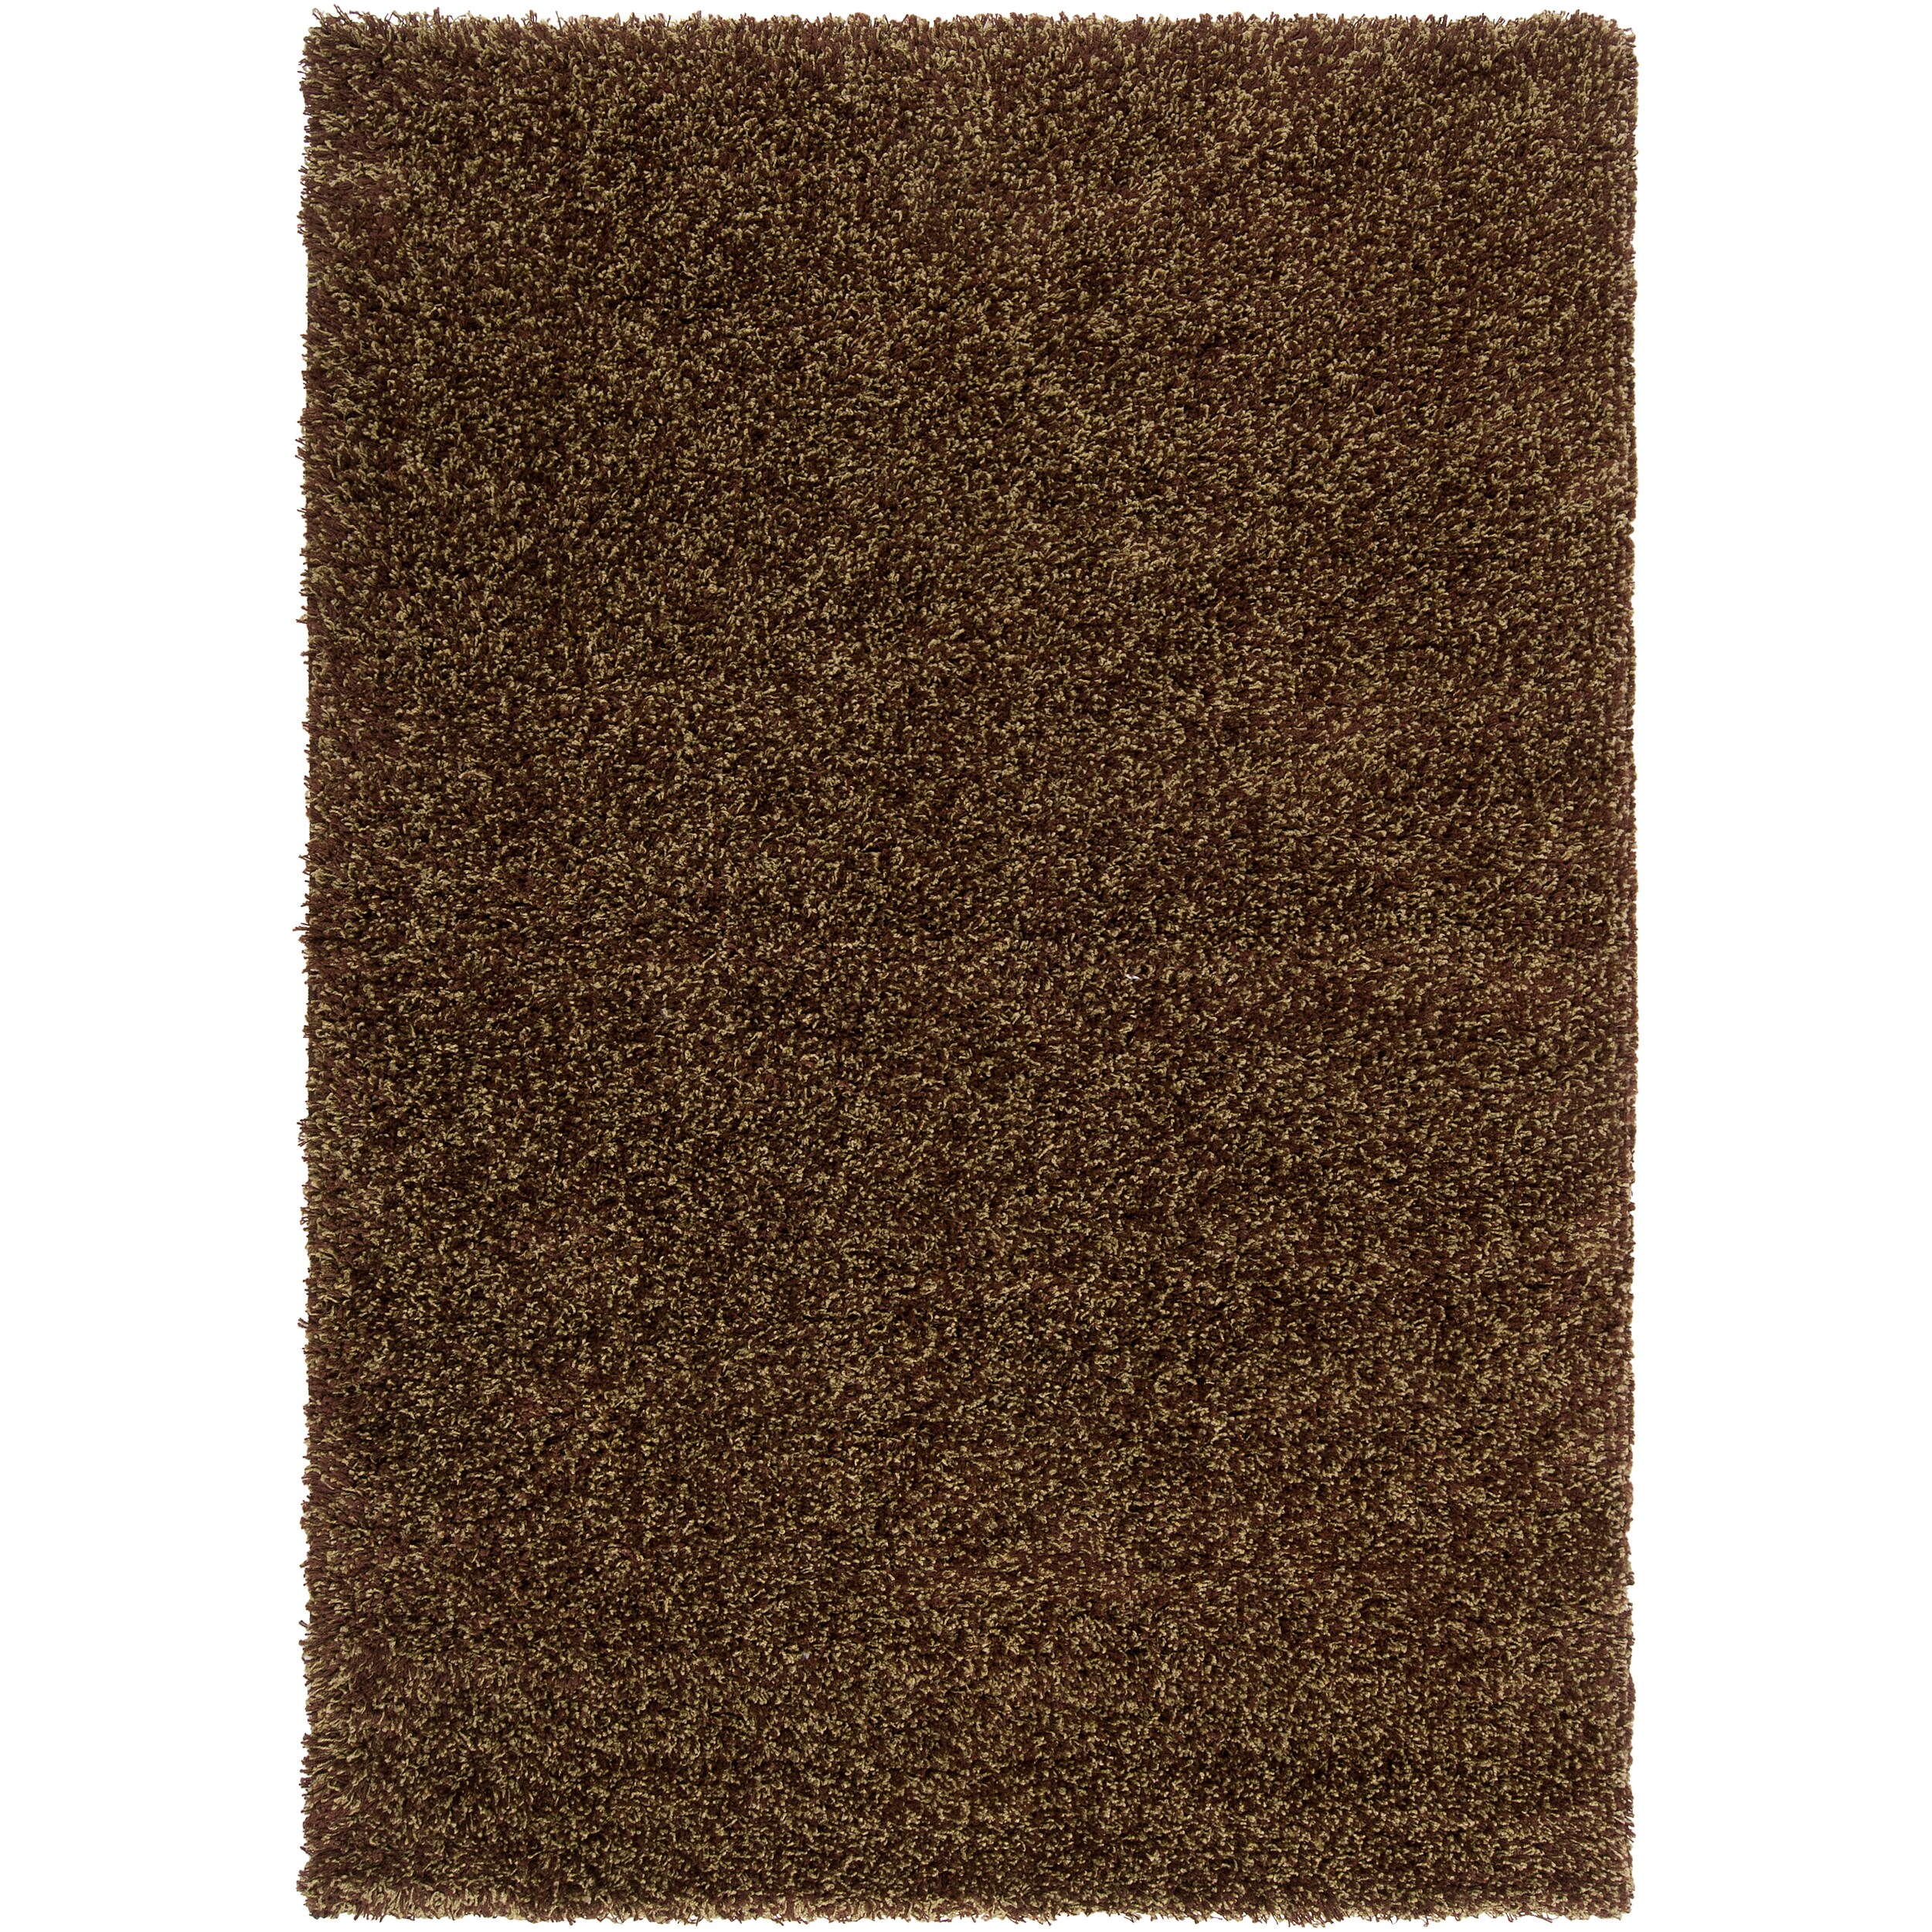 Abstract Woven Brown Luxurious Soft Shag Rug (67 X 96)